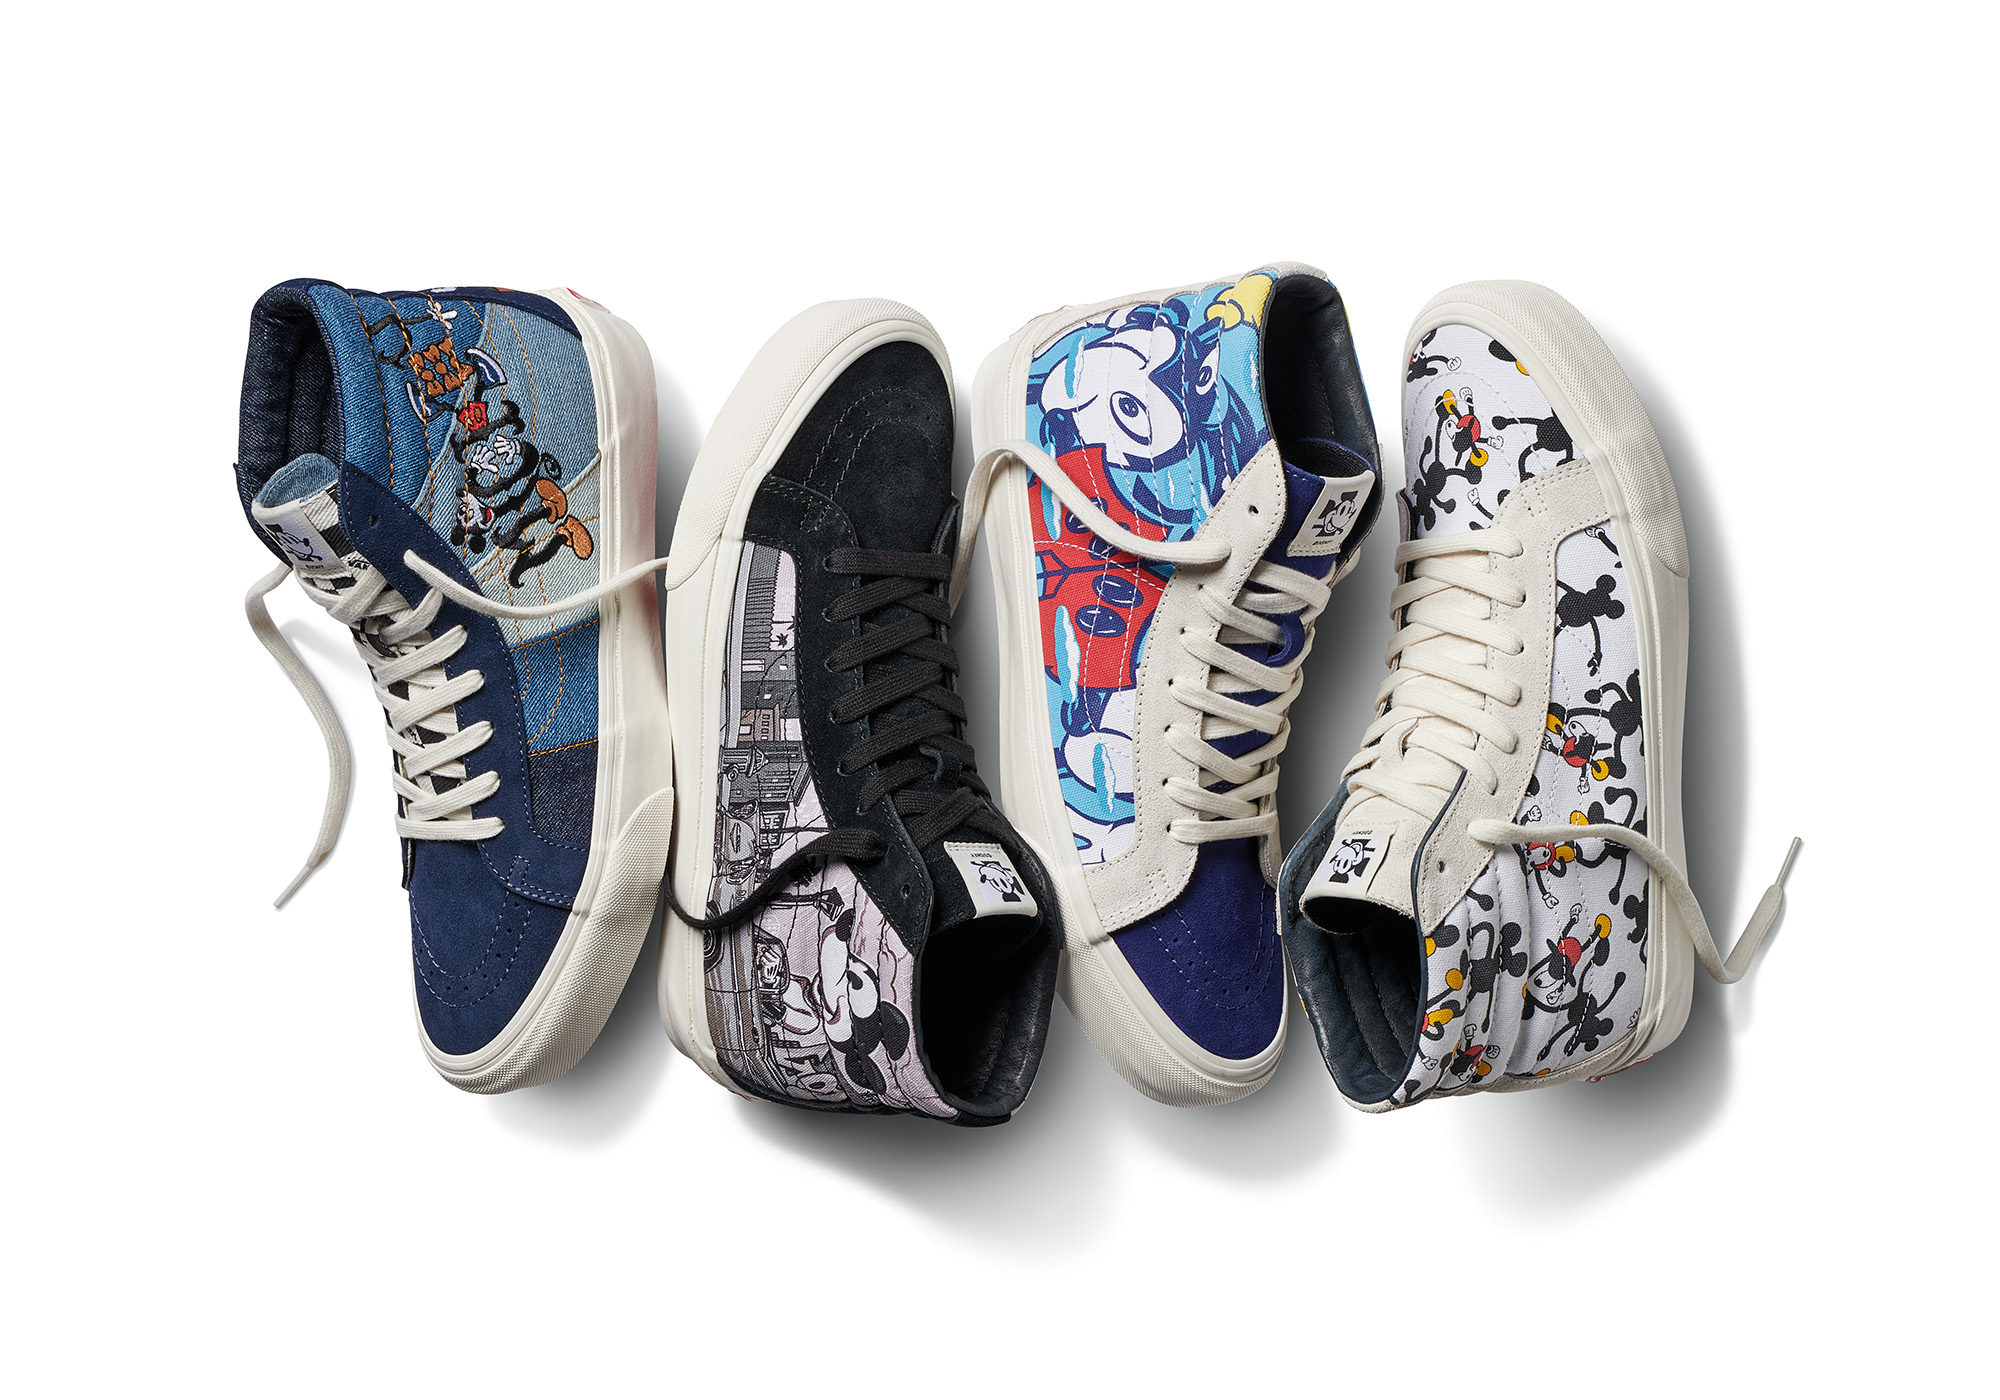 Vault by Vans x Disney – Mickey Mouse 90th Anniversary “True Original” Pack  (8.25.18) - Under The Palms